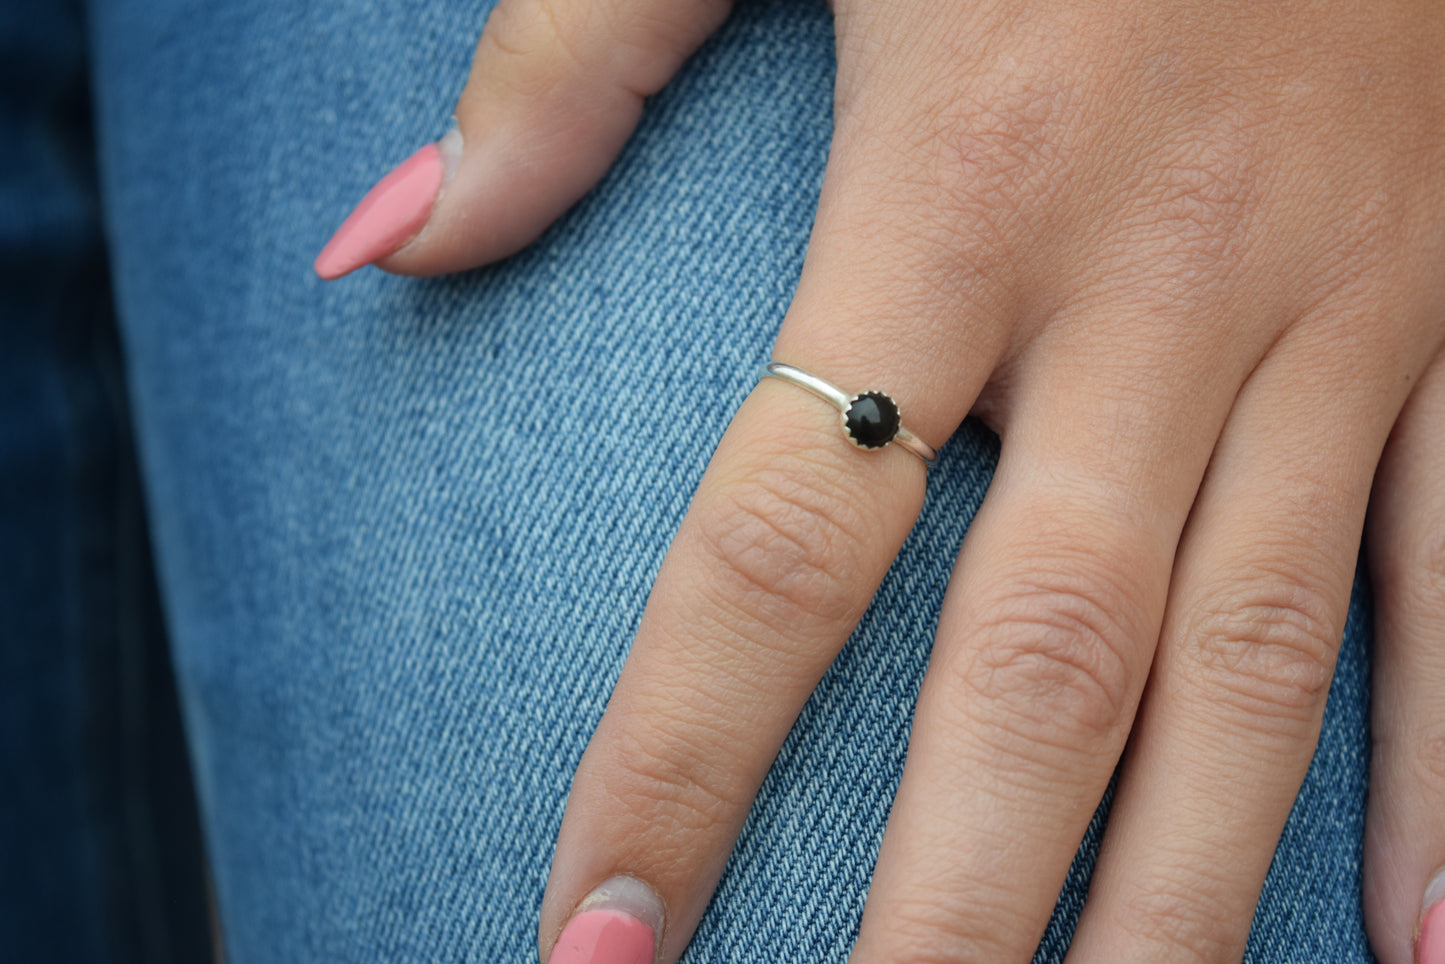 The Black Small Stone Ring